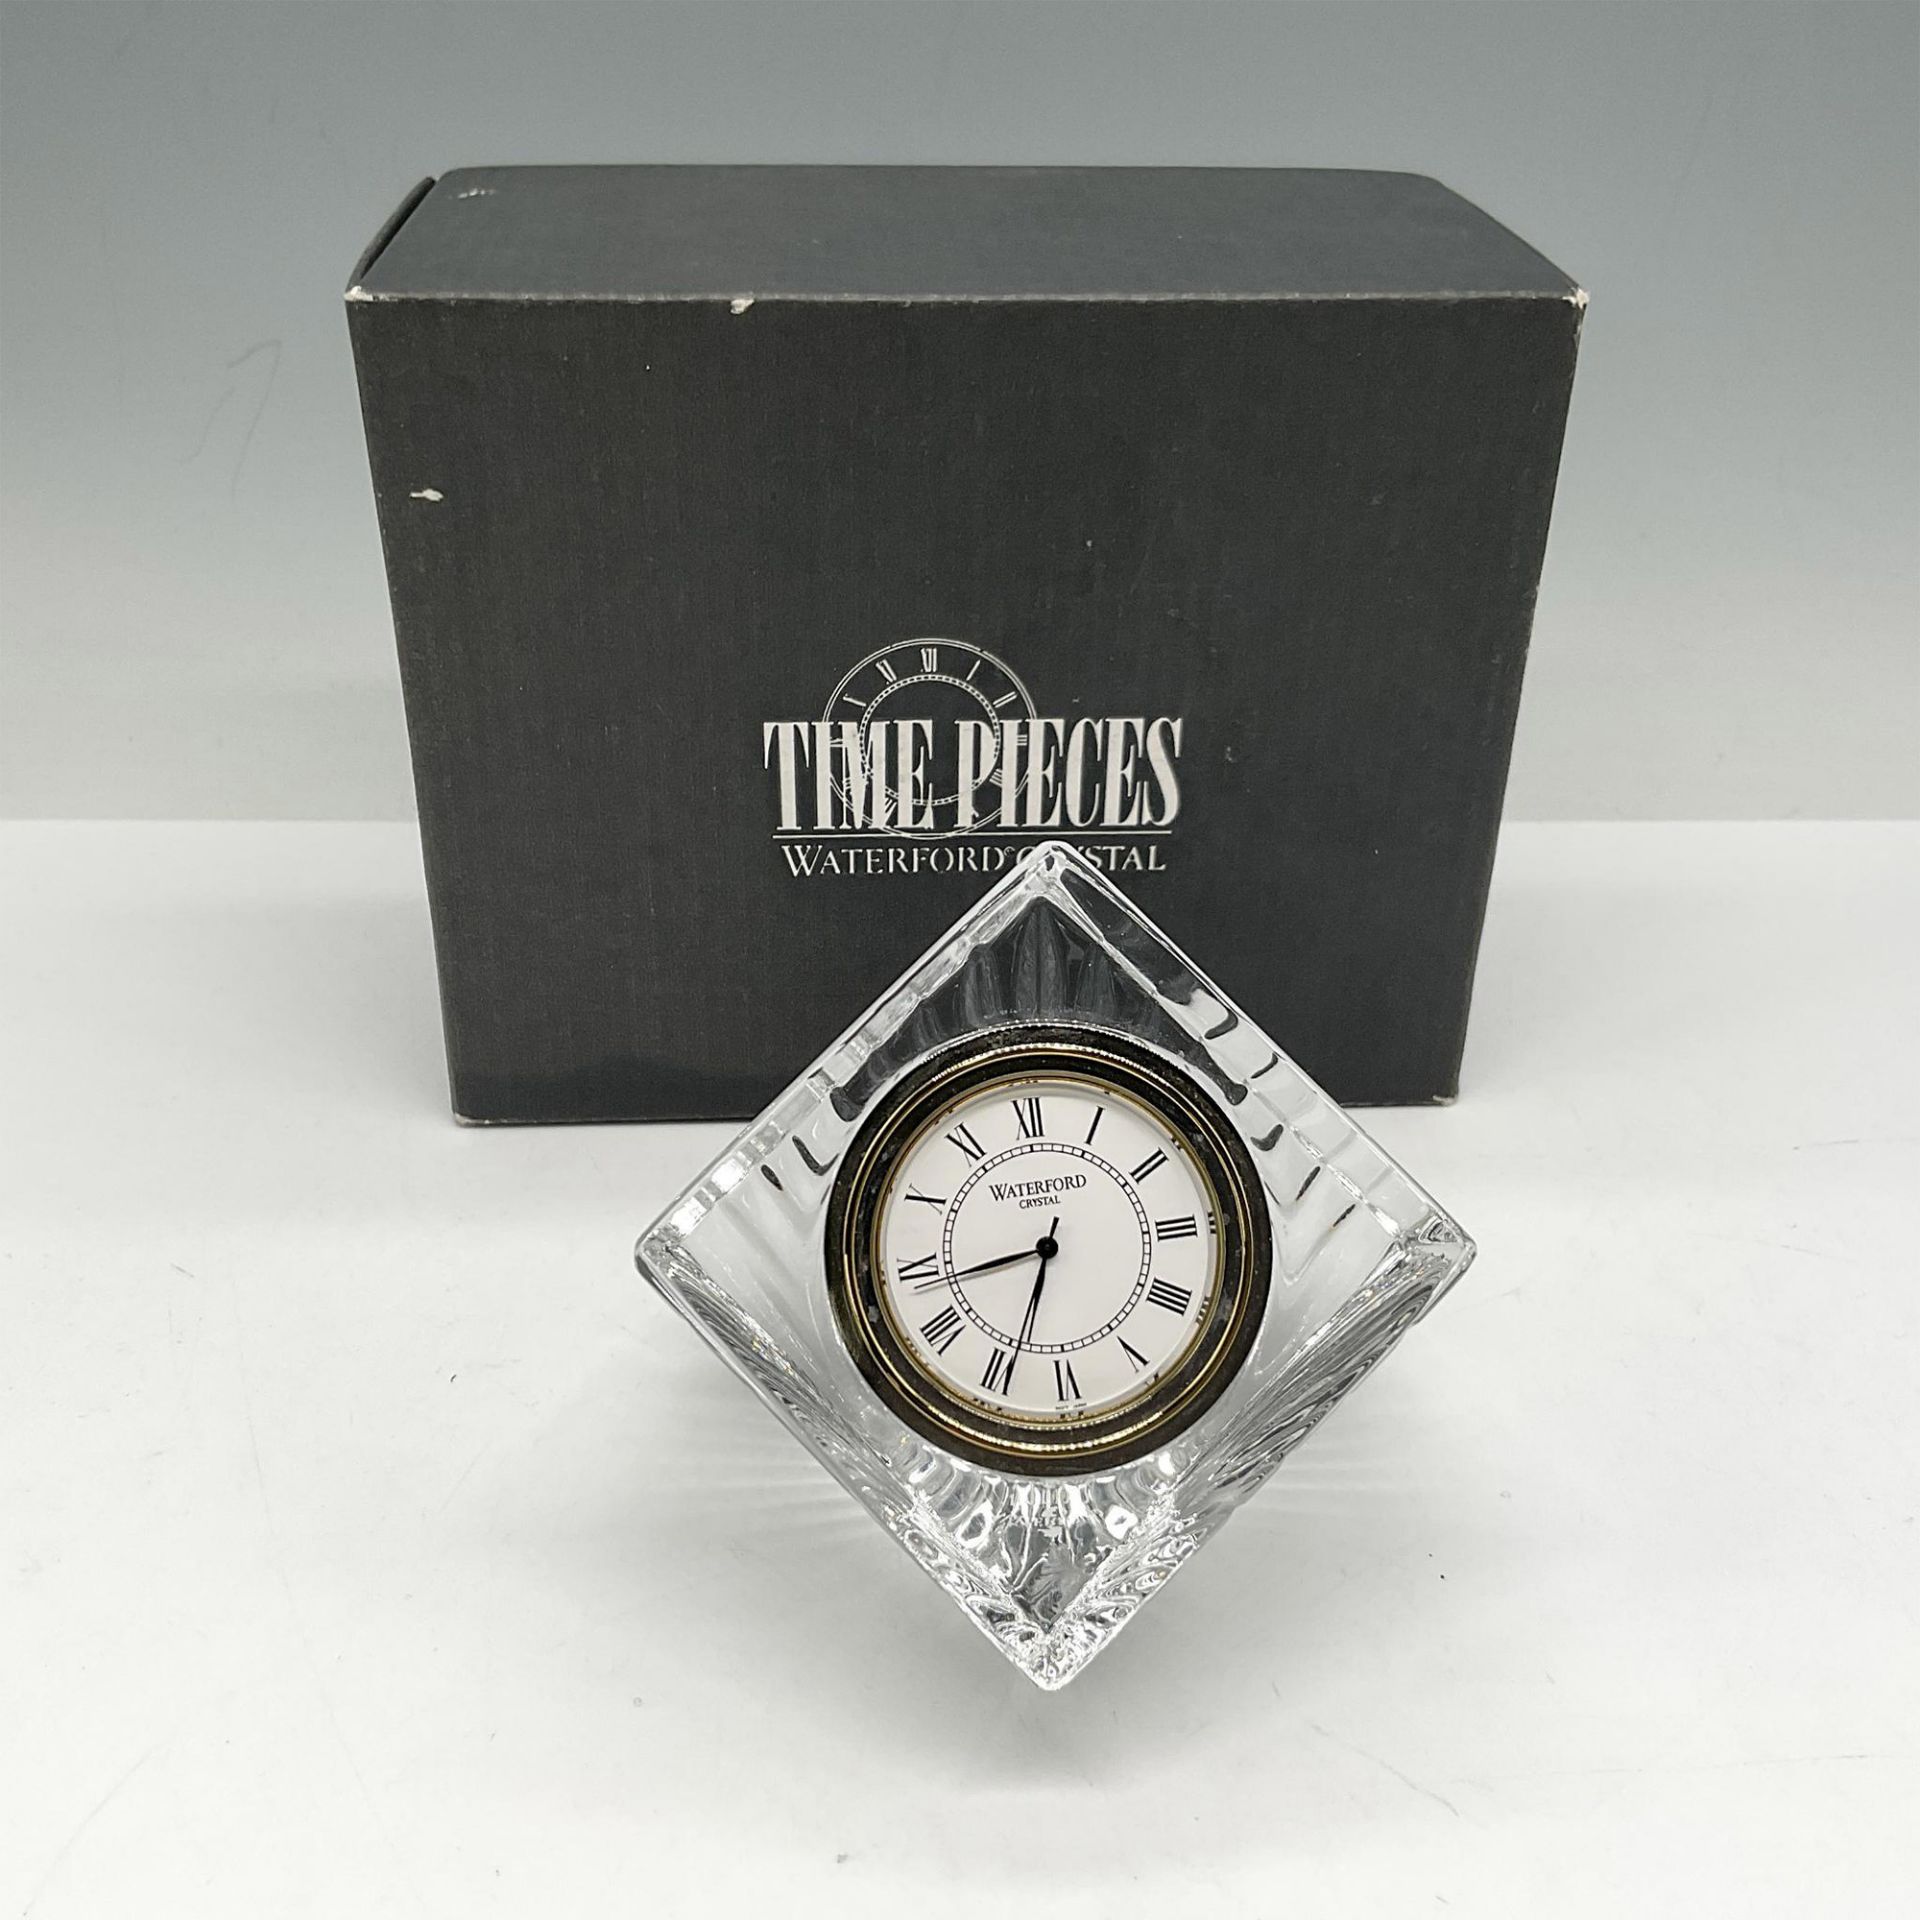 Waterford Crystal Time Pieces, Meridian Cube Desk Clock - Image 4 of 4